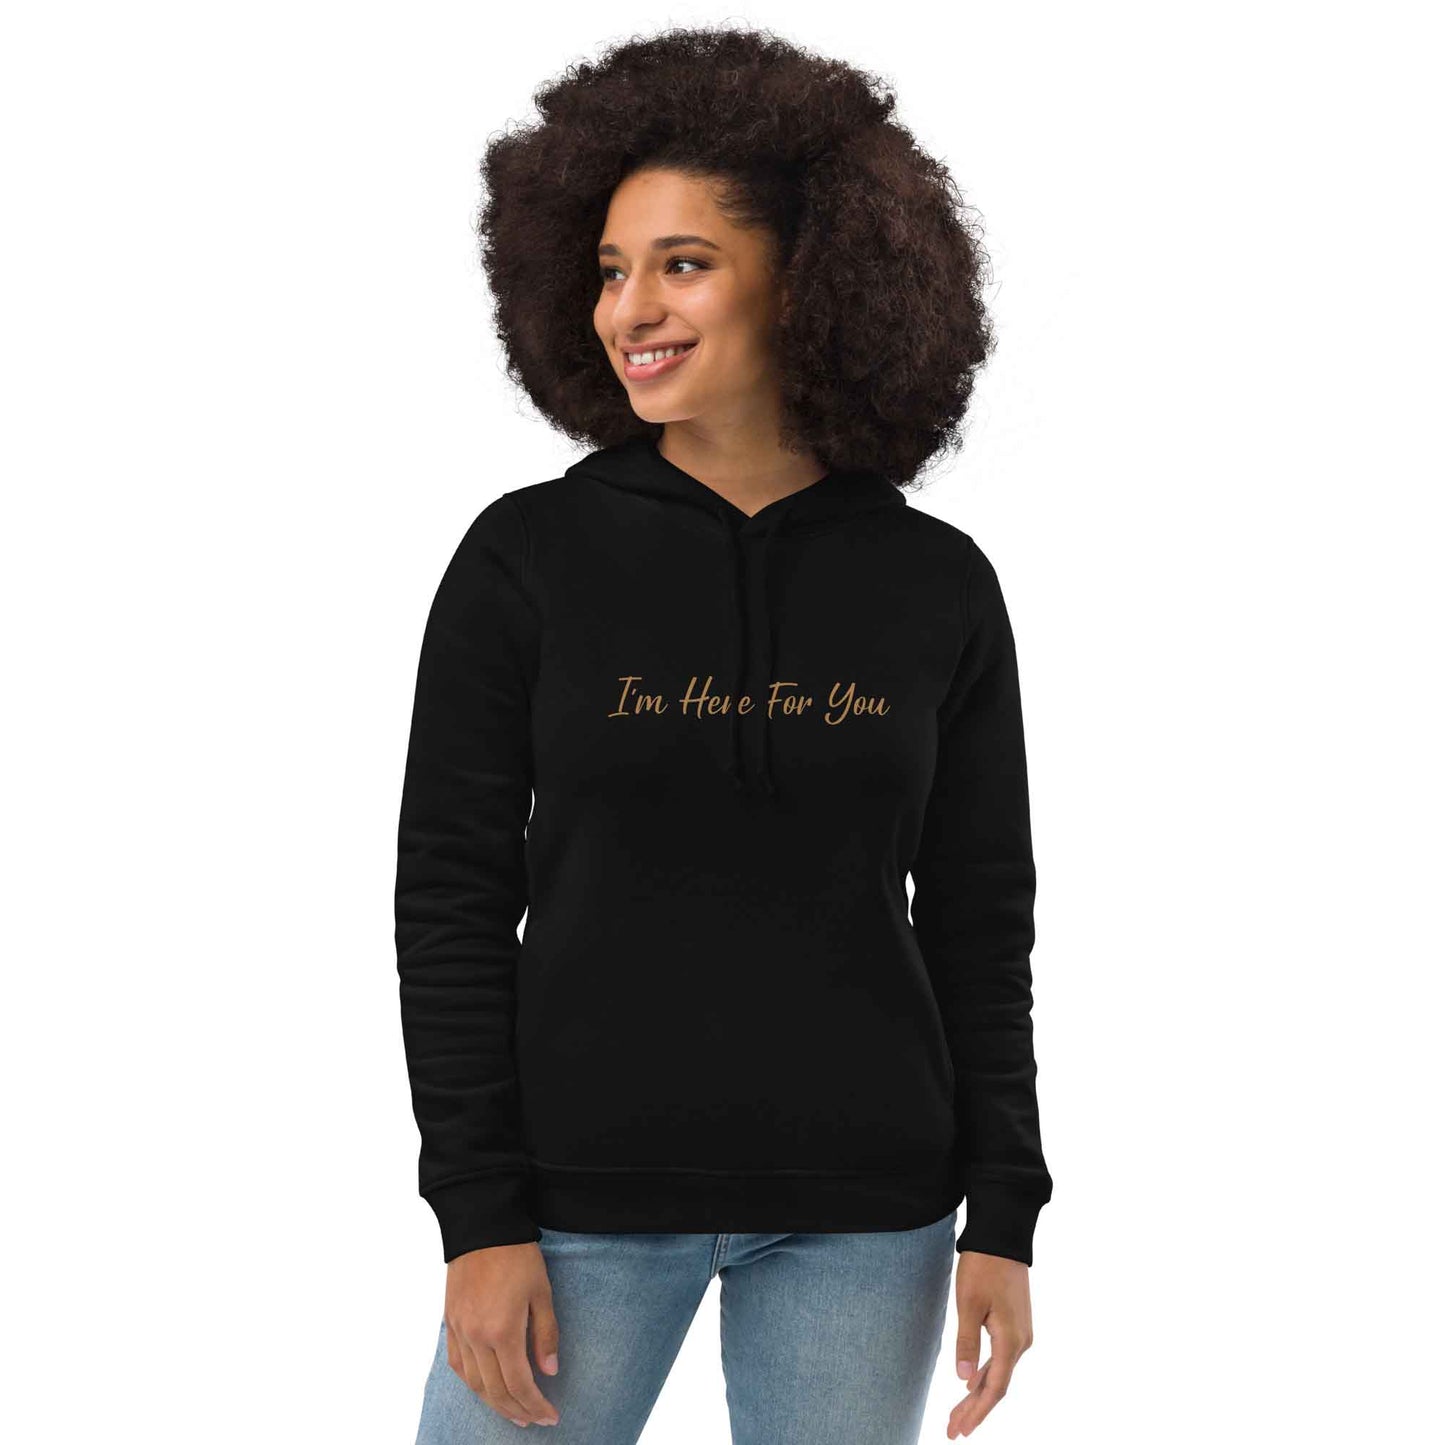 Women black inspirational hoodie with inspirational quote, "I'm Here For You."